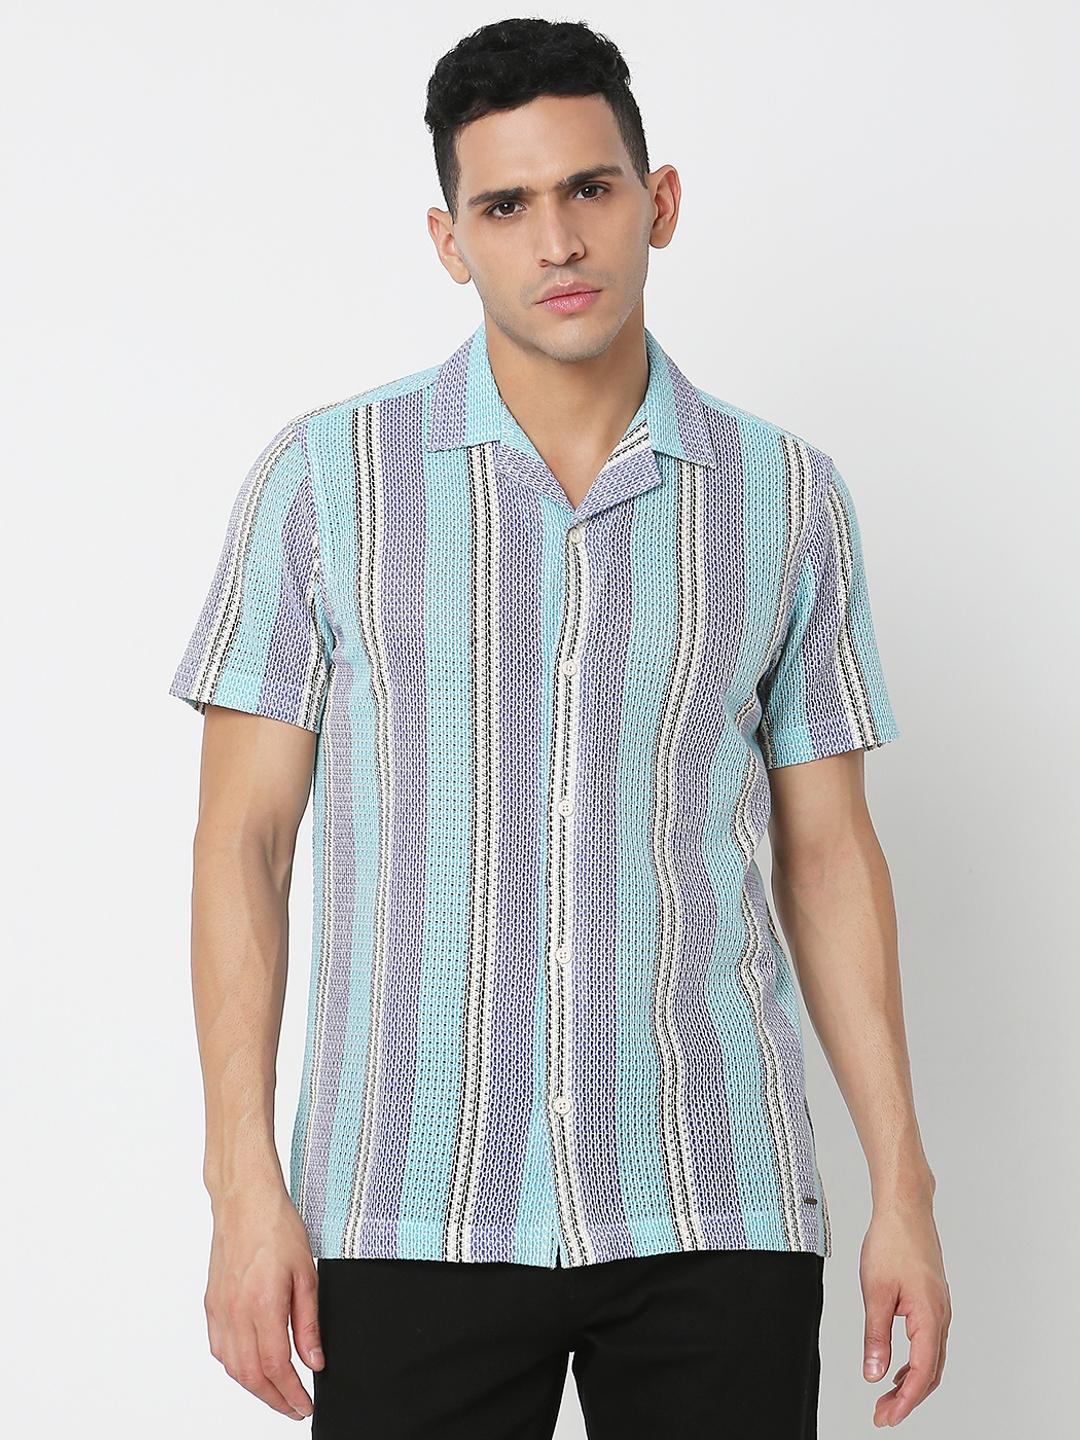 Regular Fit Striped Short Sleeve Shirt with Classic Collar